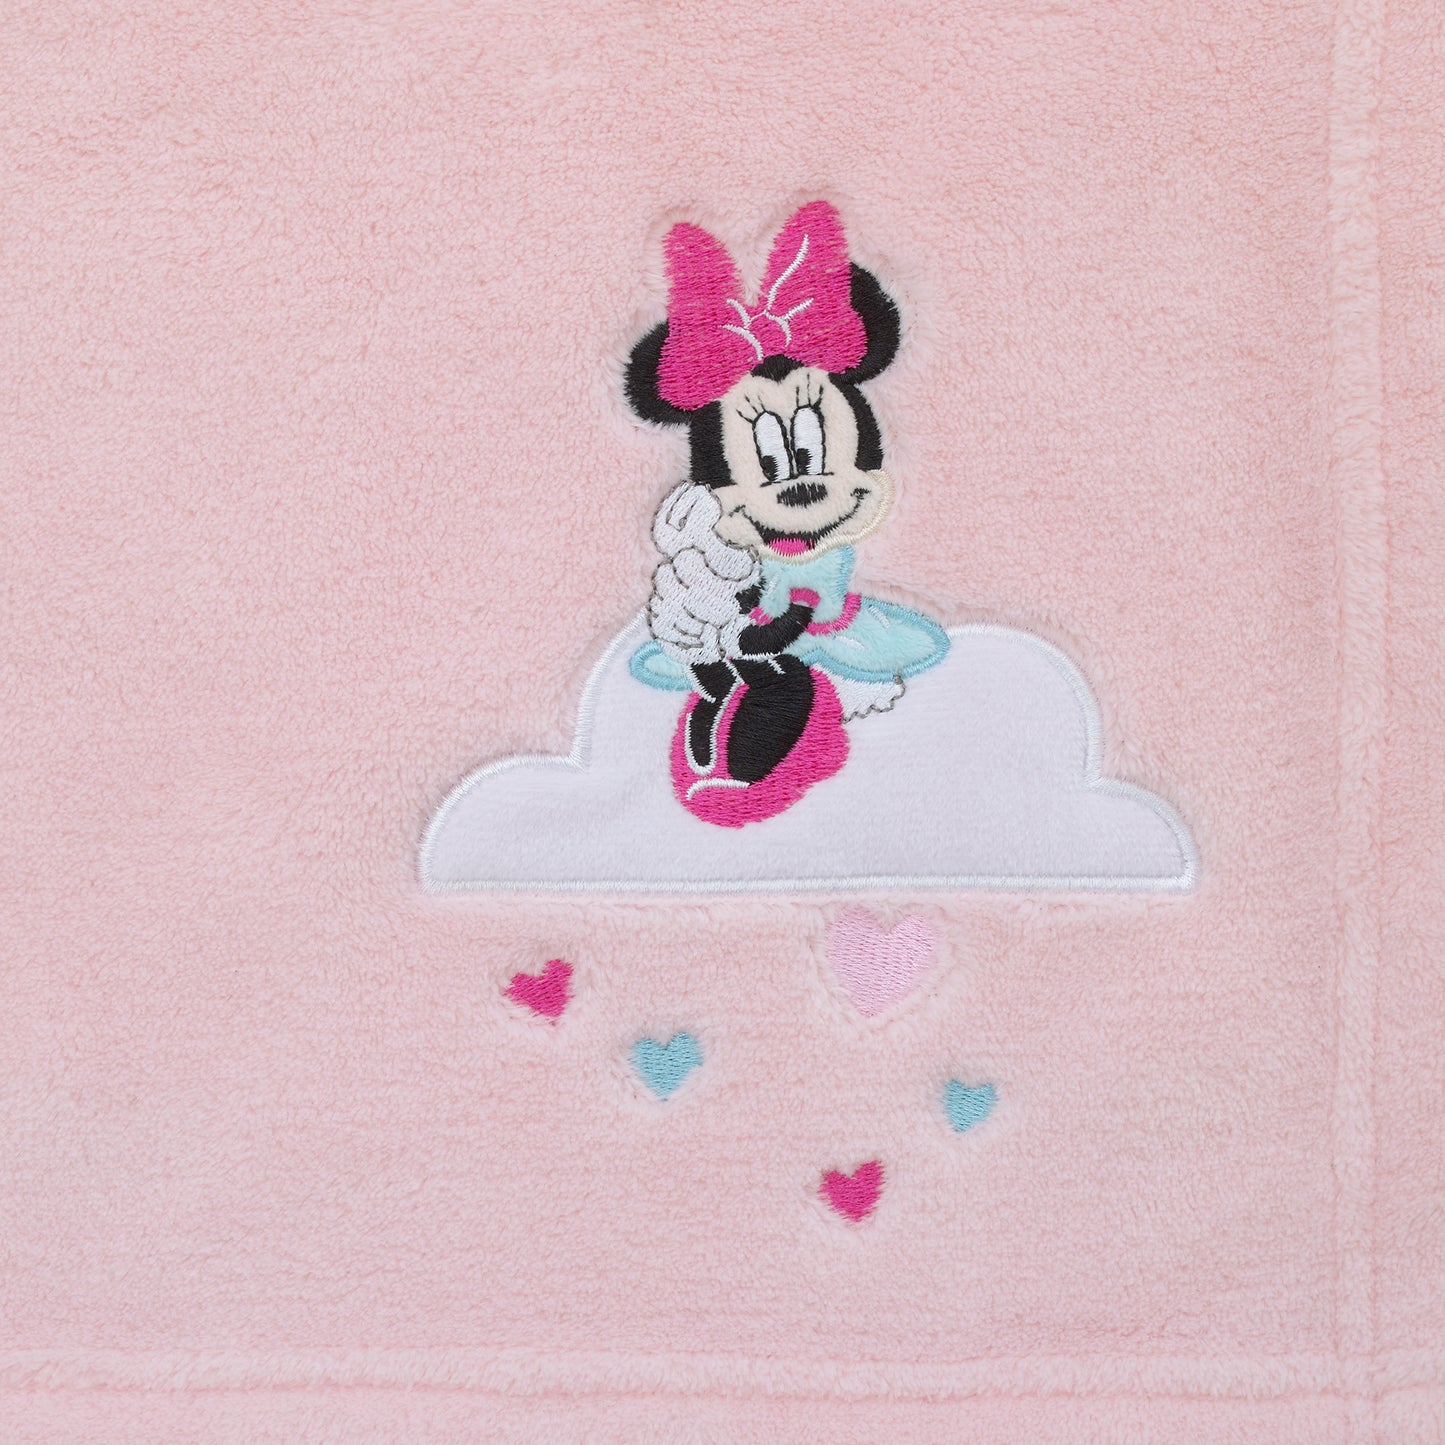 Disney Minnie Mouse Be Happy Pink, Aqua and White Super Soft Baby Blanket with Cloud Applique